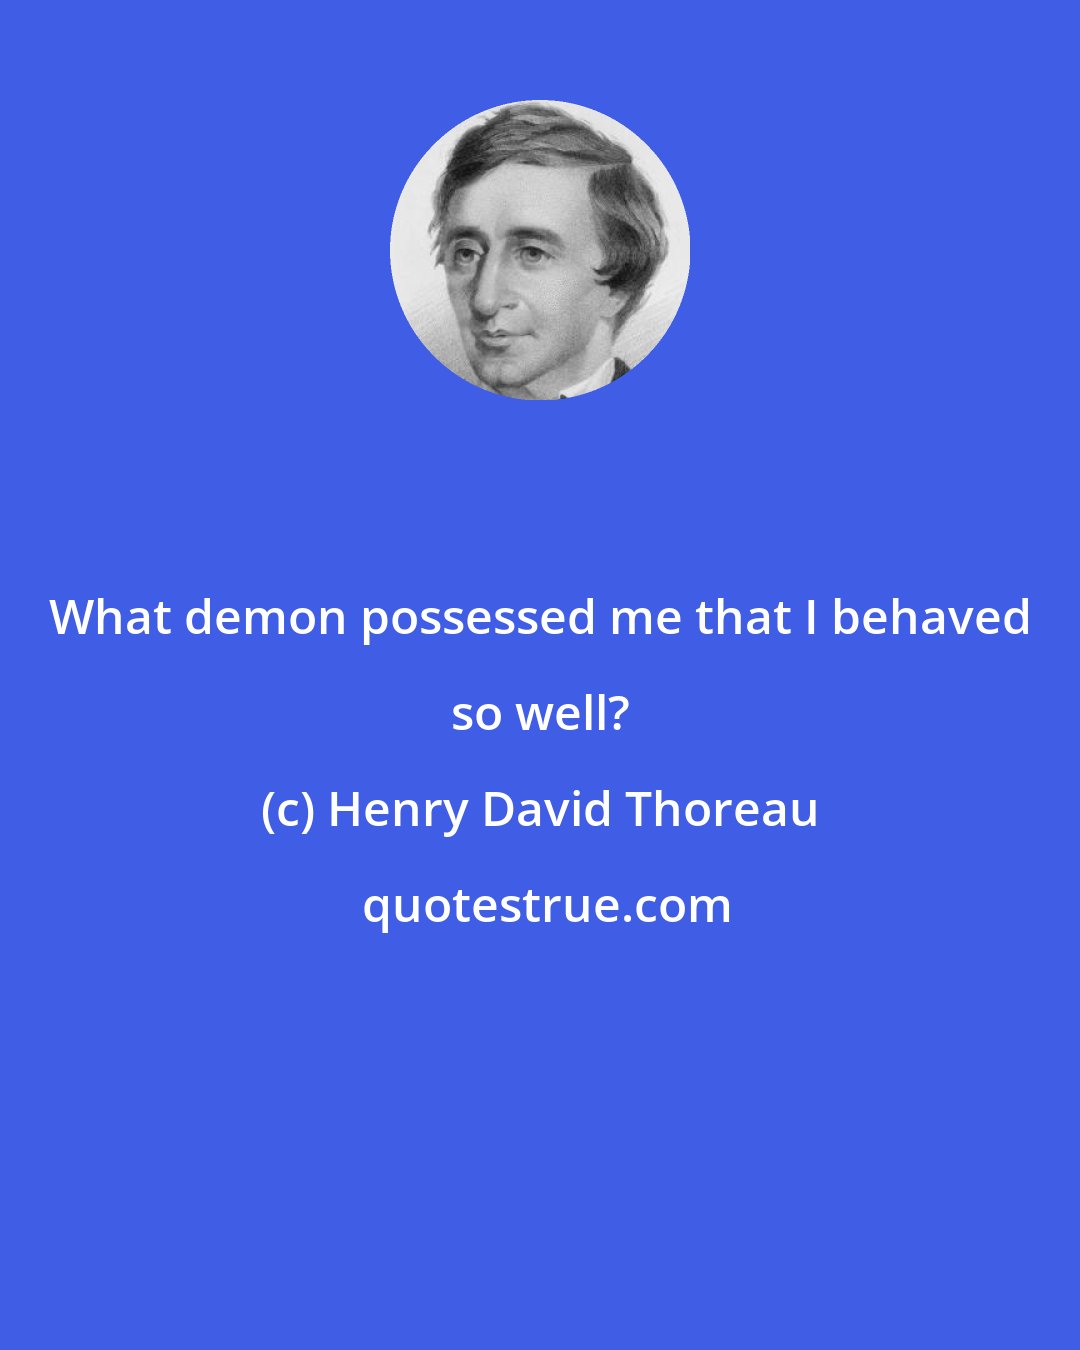 Henry David Thoreau: What demon possessed me that I behaved so well?